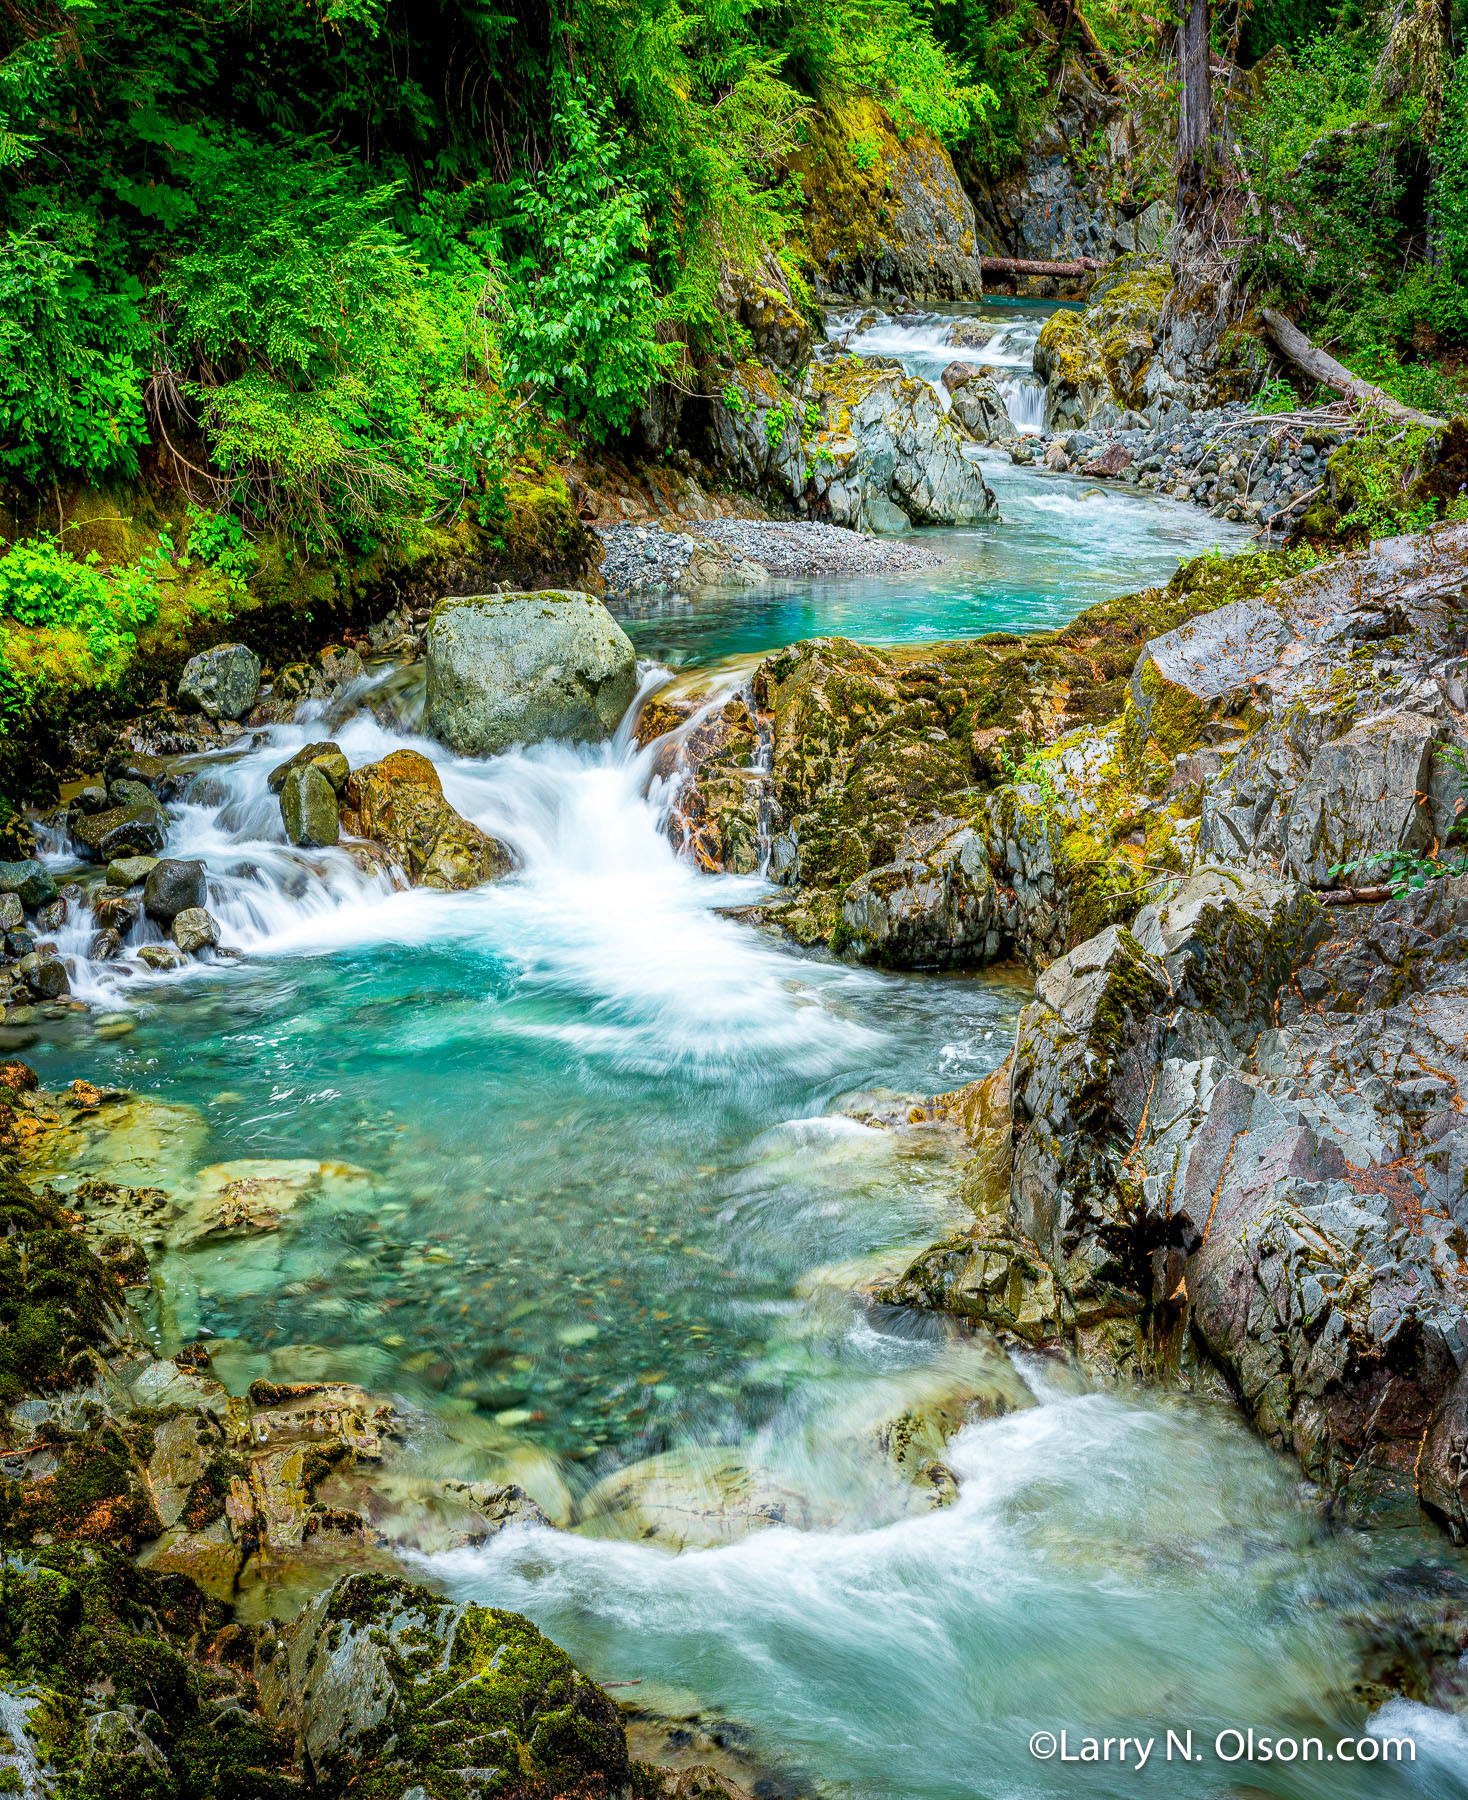 Ohanapecosh River, Mount Rainier National Park, WA | The crystline clear water of  Ohanapecosh River flows through an old growth forest,